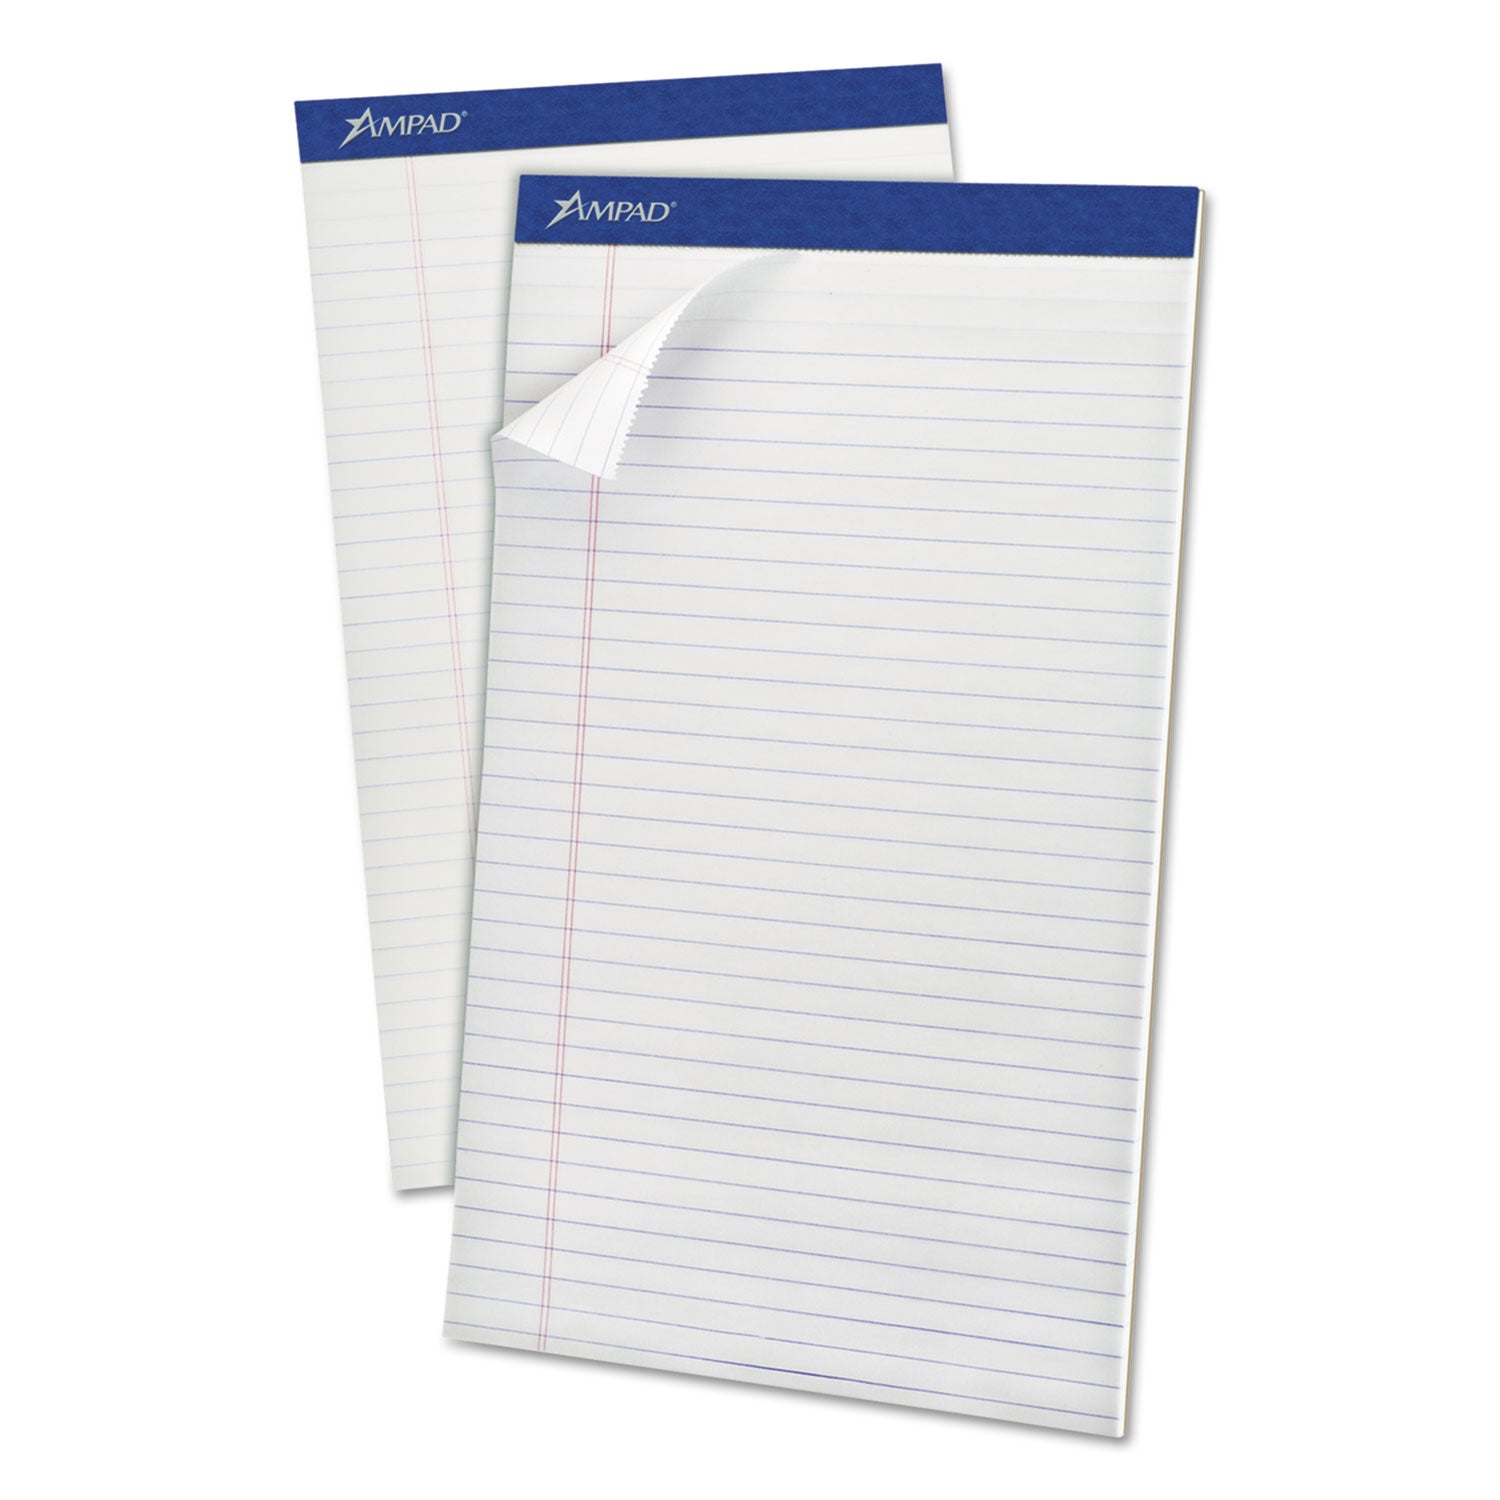 Perforated Writing Pads, Wide/Legal Rule, 50 White 8.5 x 14 Sheets, Dozen - 